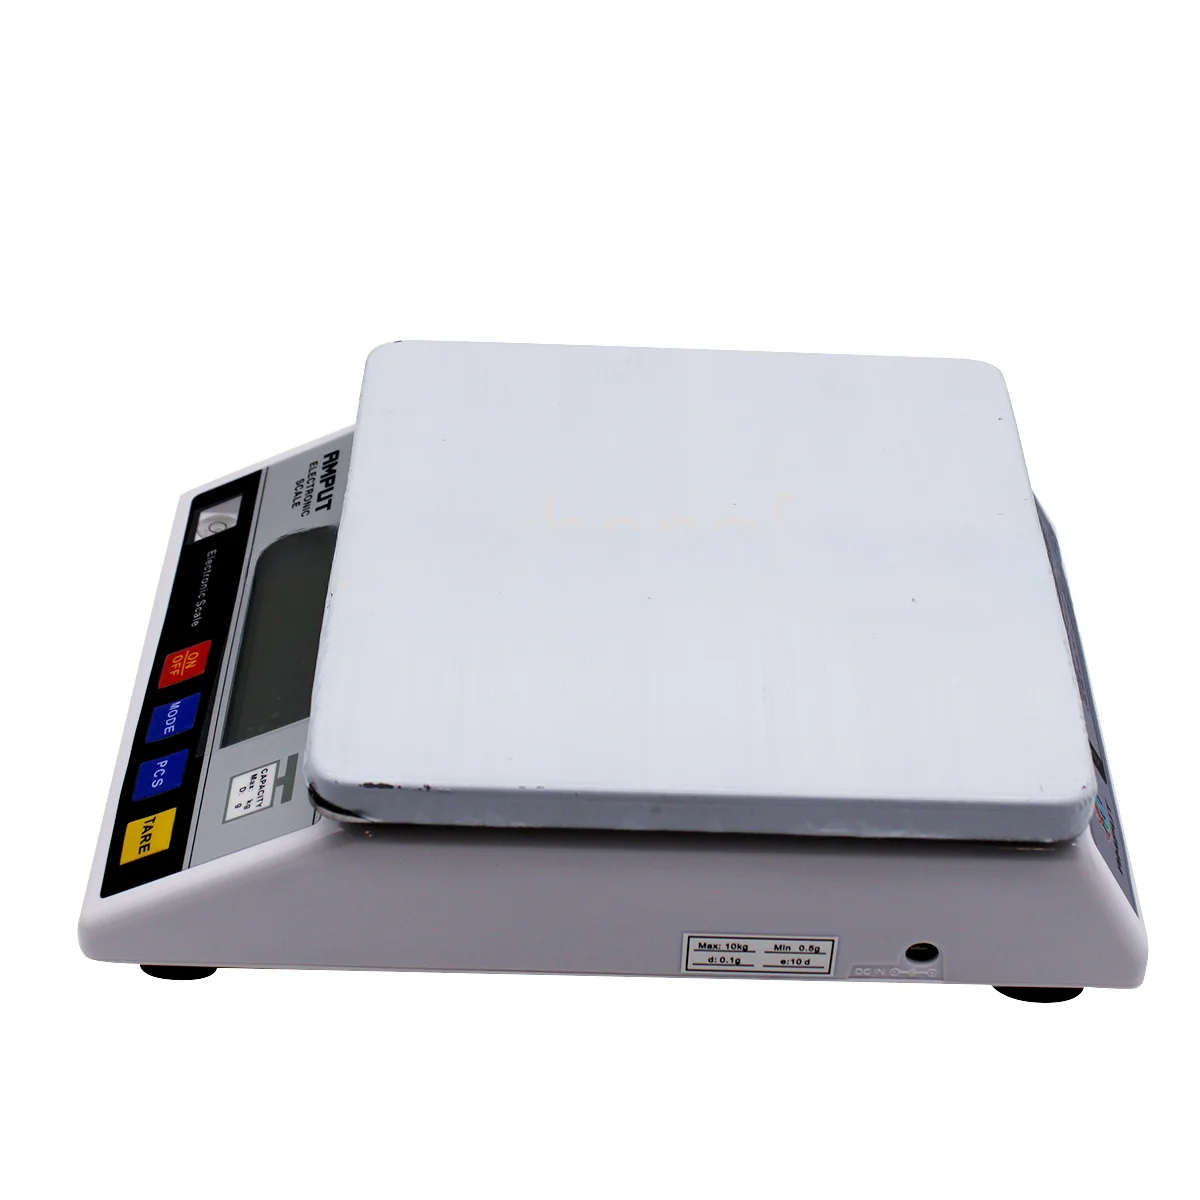 

10kg x 0.1g Digital Precision Electronic Laboratory Balance Industrial Weighing Scale Balance w/ Counting Table Top Scale